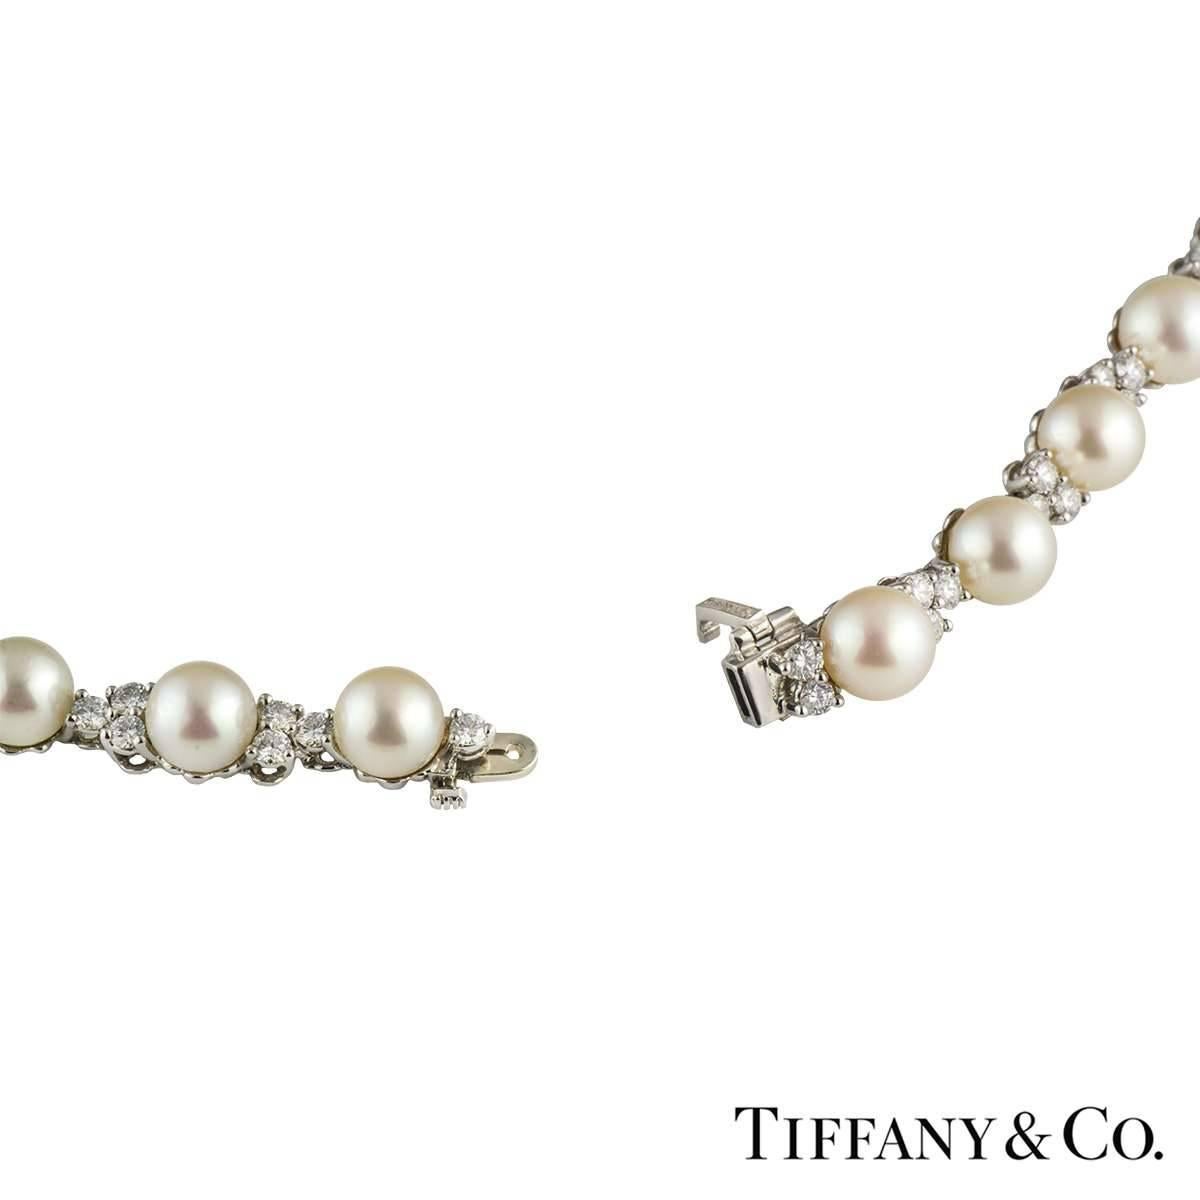 A beautiful Tiffany & Co pearl and diamond necklace in platinum from the Aria collection. The necklaces comprises of Akoya cultured pearls alternating with 3 round brilliant cut diamonds. There are 36 pearls and are of 6.5mm to 7mm in size.